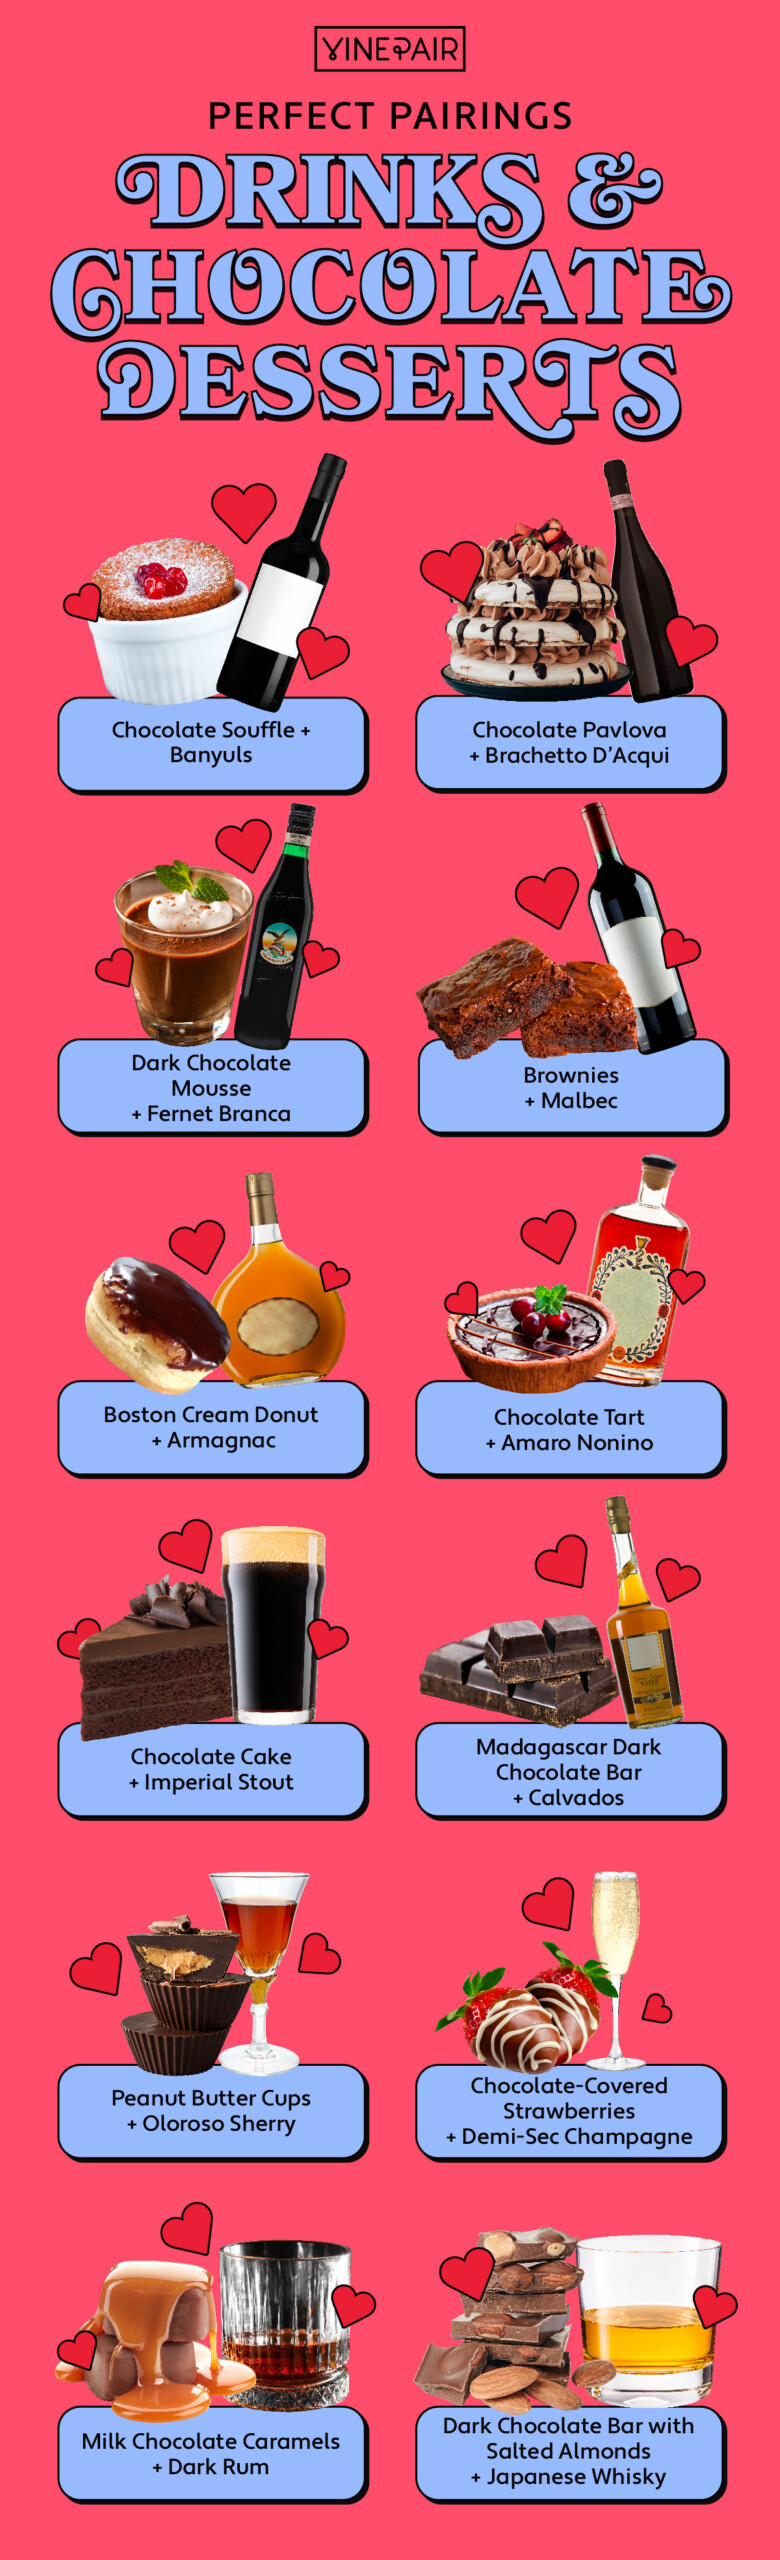 12 Perfect Drink Pairings for your Favorite Chocolate Desserts